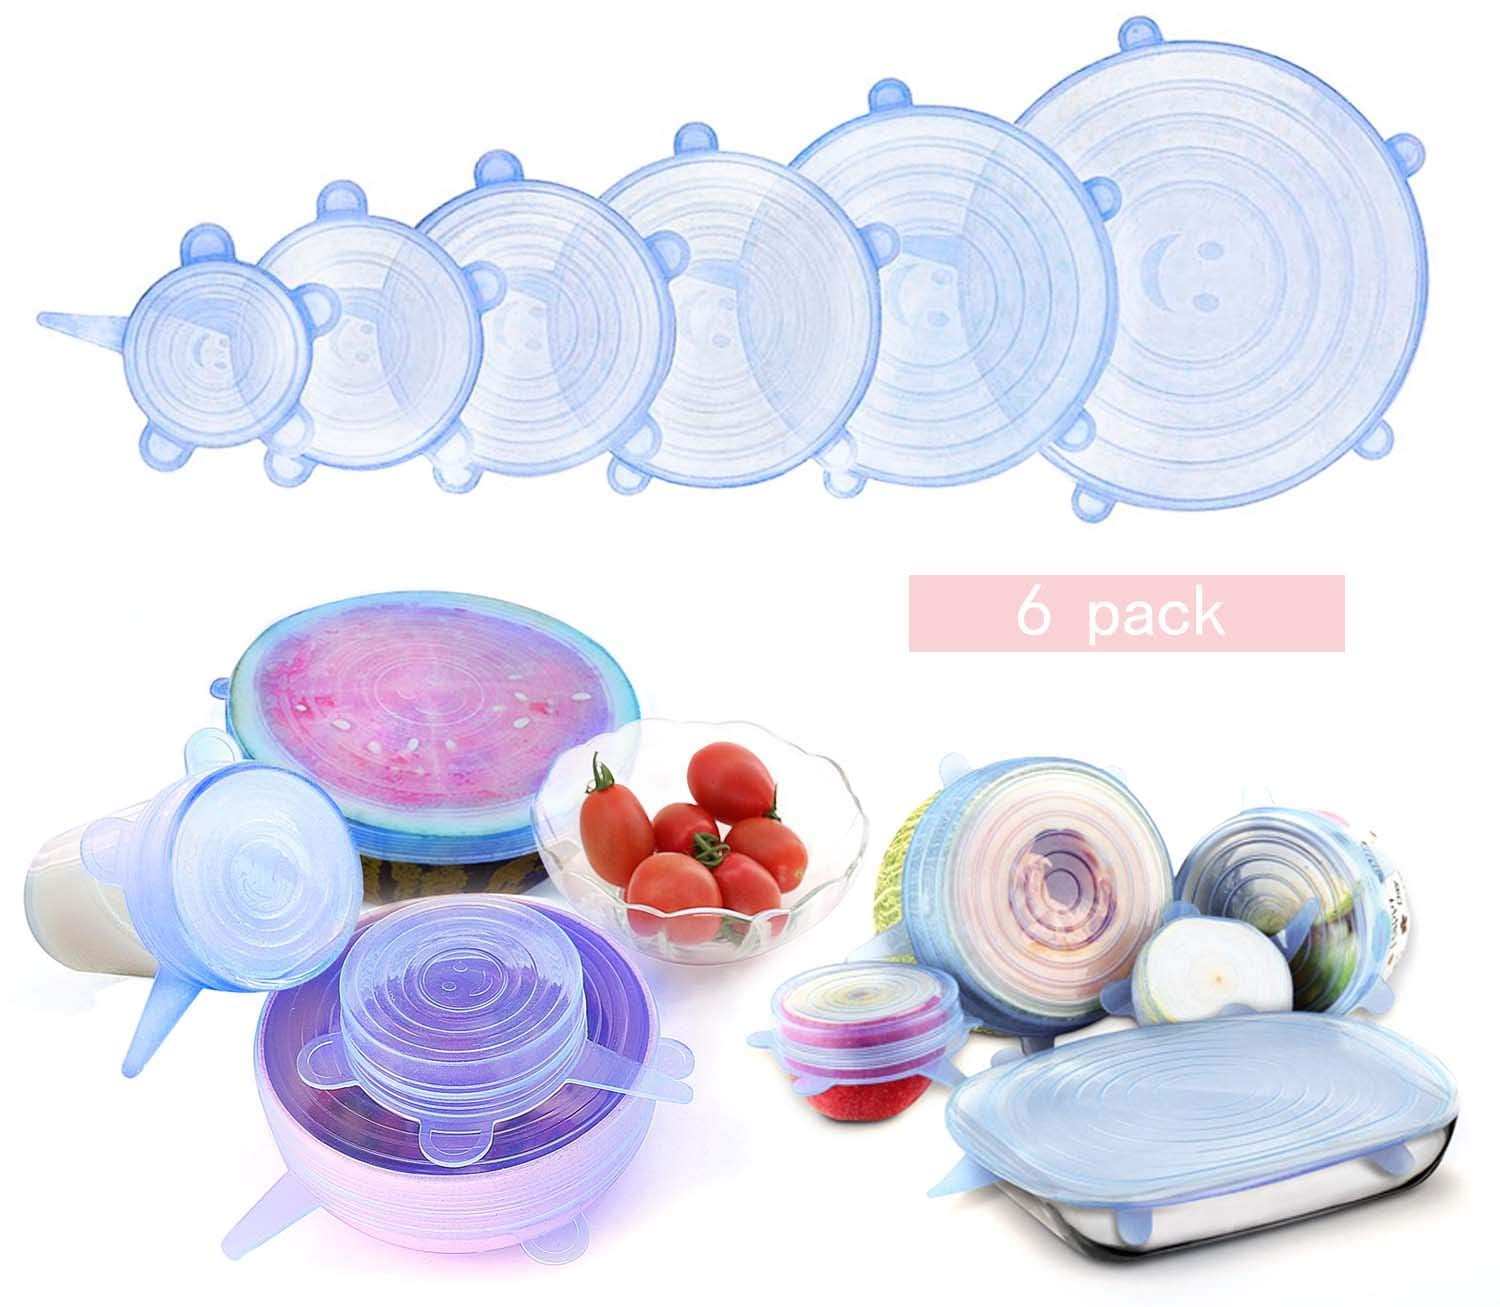 NEW Silicone Stretch Lid 6 PCS Reusable Wrap Covers Keep Food Fresh Blue